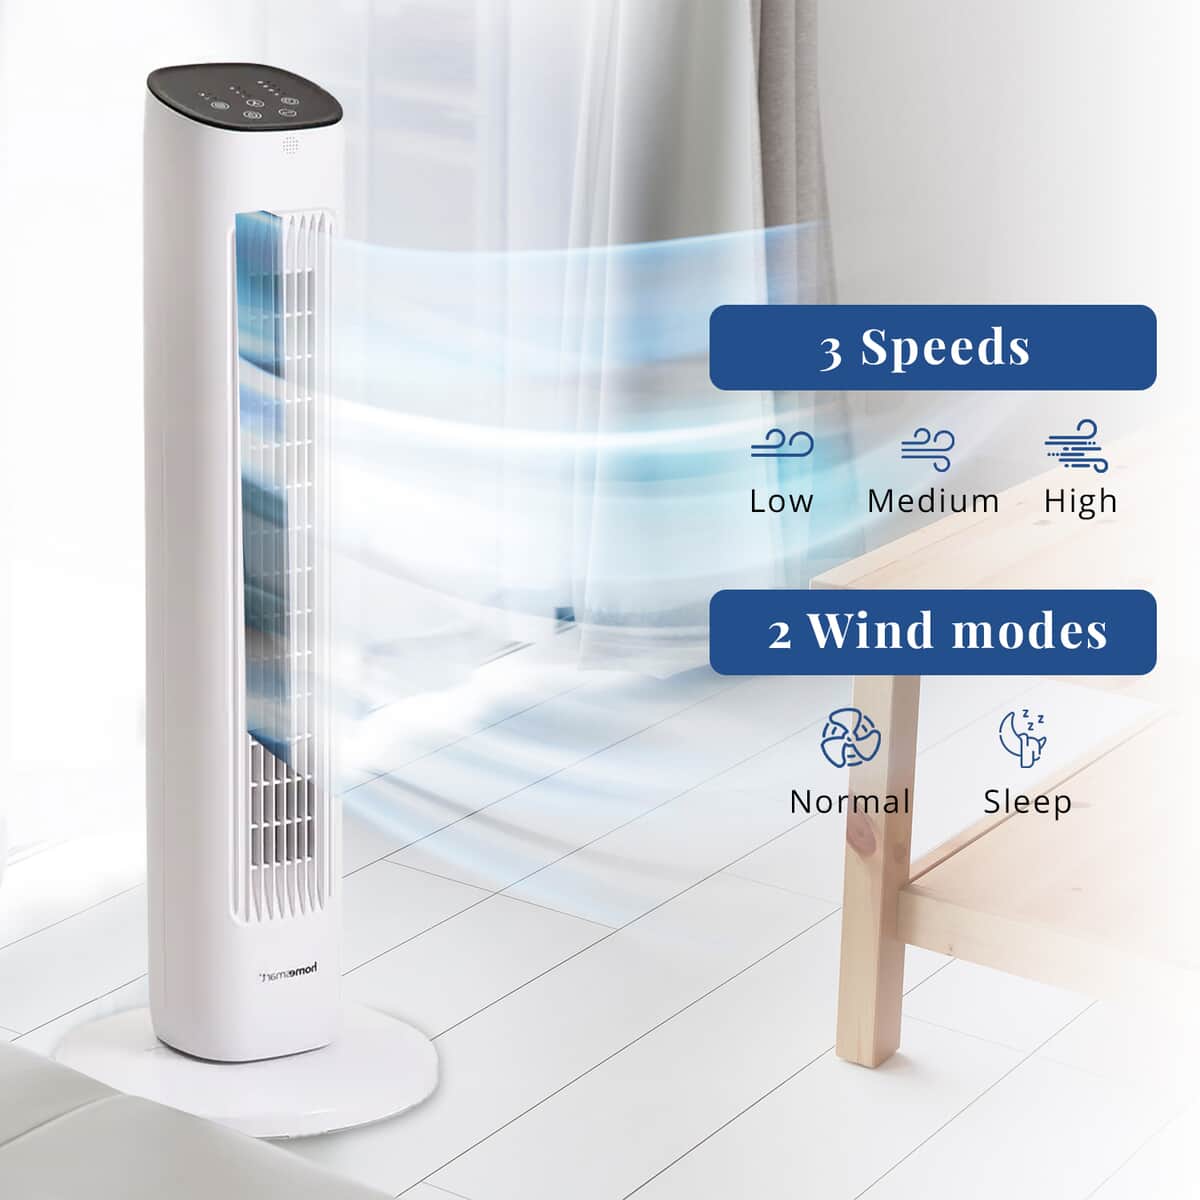 Remote Control Tower Fan with Copper Motor in 2 Modes & 3 Speed - White (11.8"x11.8"x30.7") image number 3